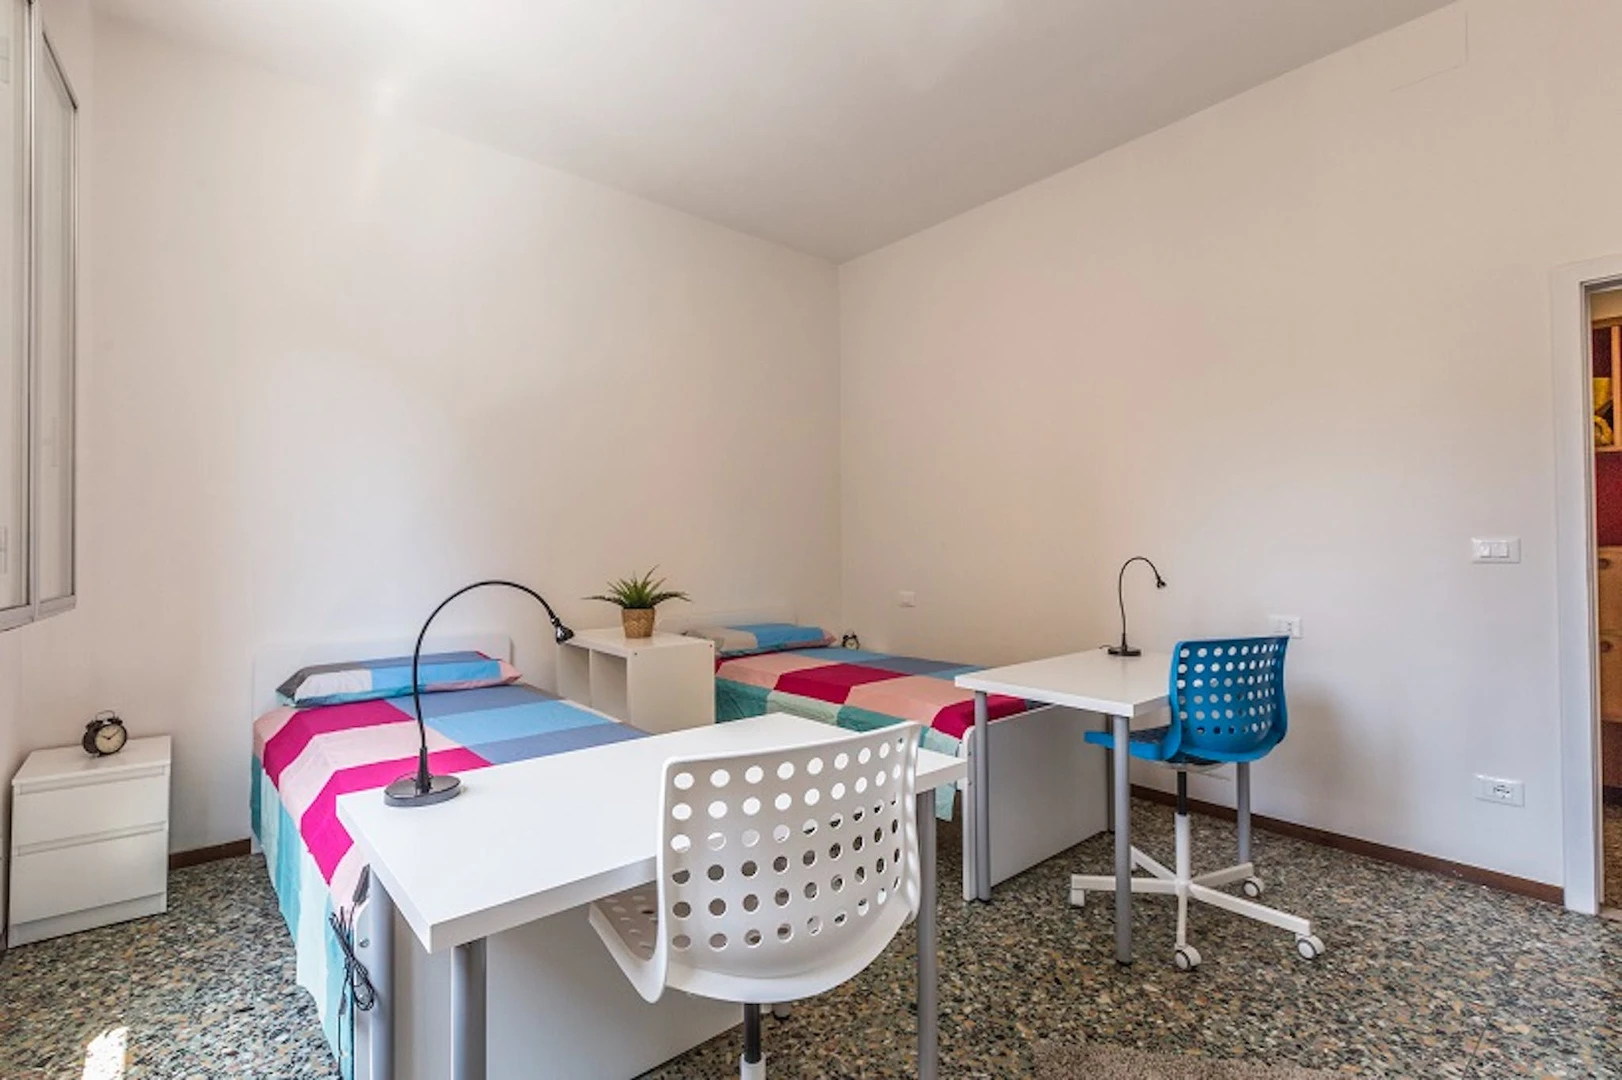 Shared room in 3-bedroom flat Bologna